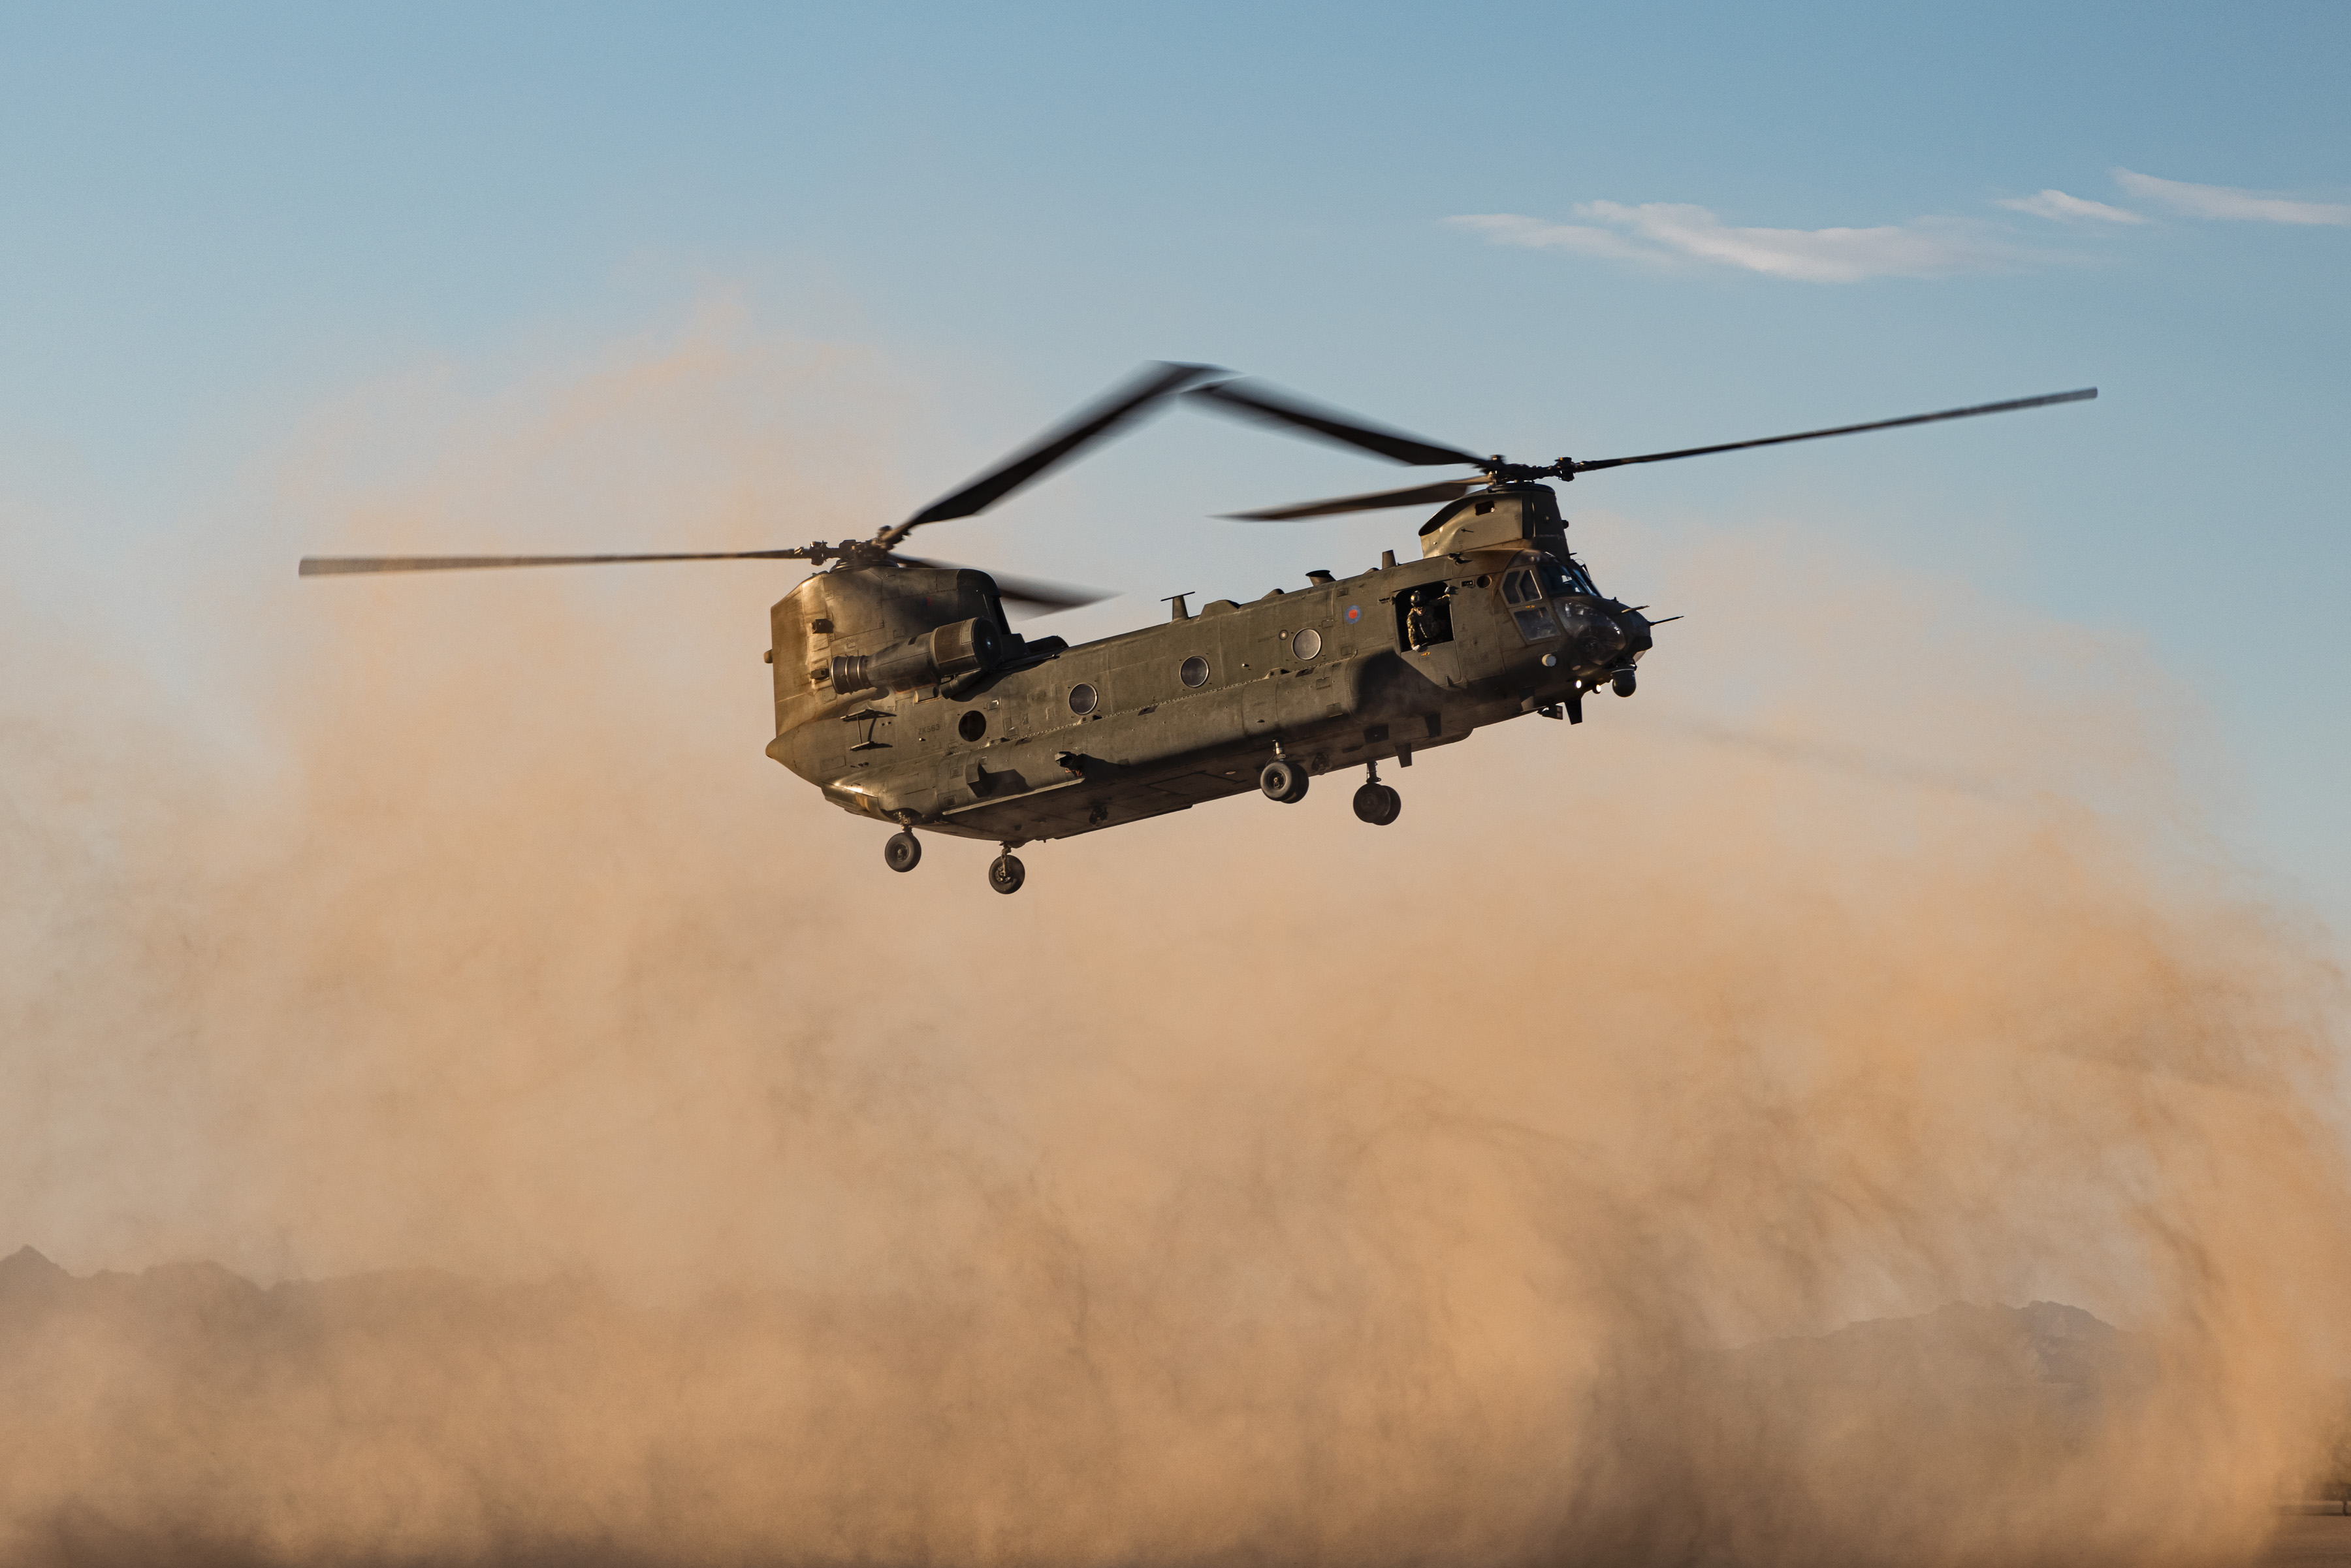 Chinook hovering over desert creating a dust cloud